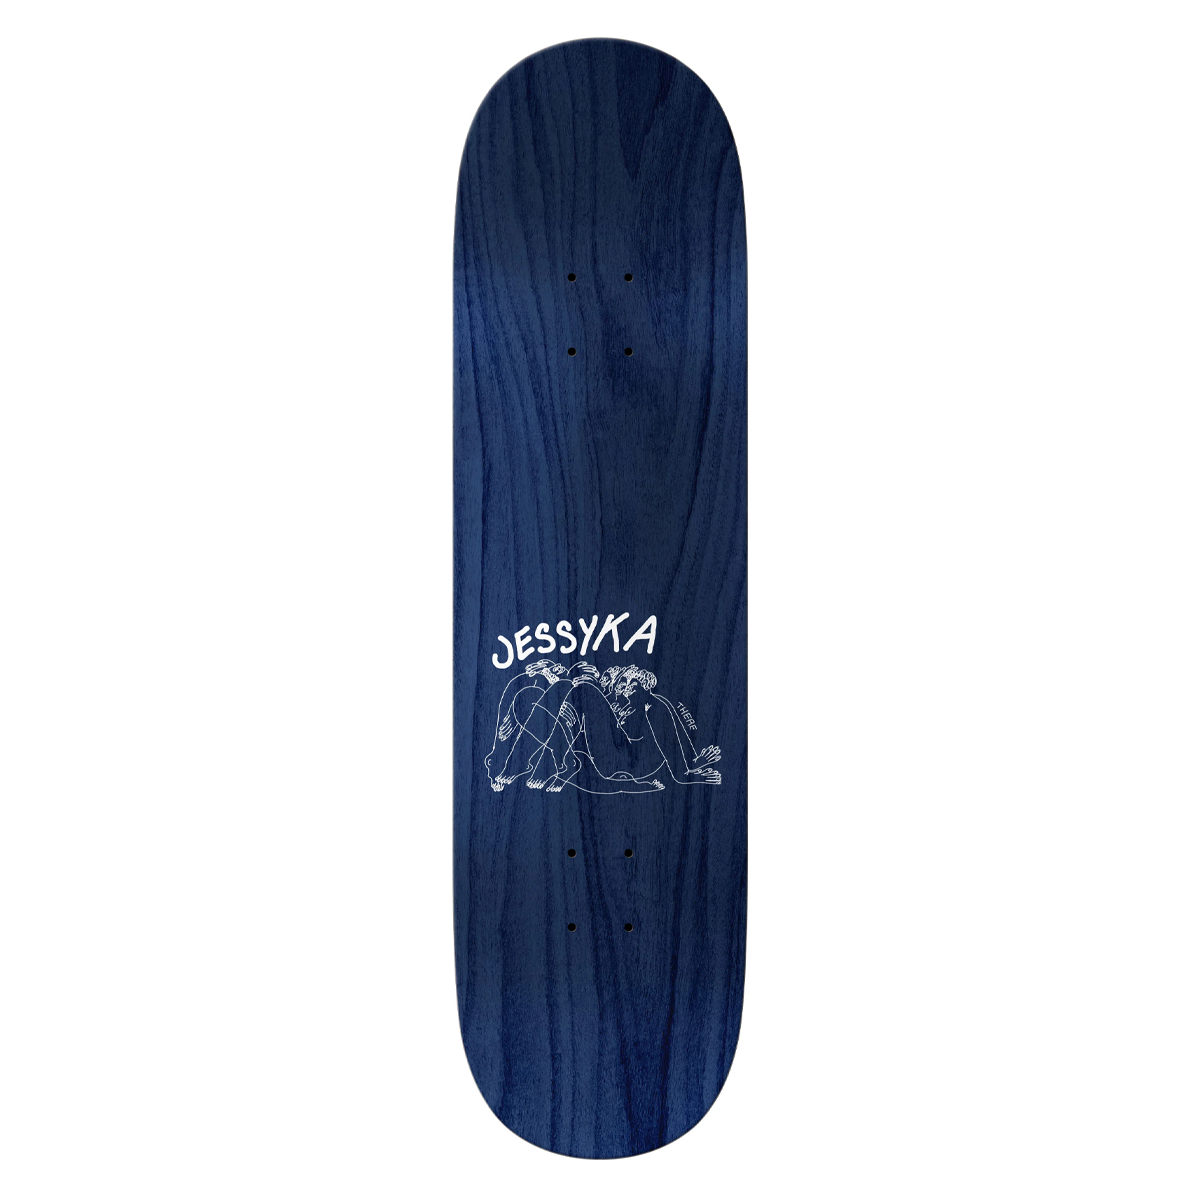 There Jessyka In Ur Face Skate Deck - 8.25